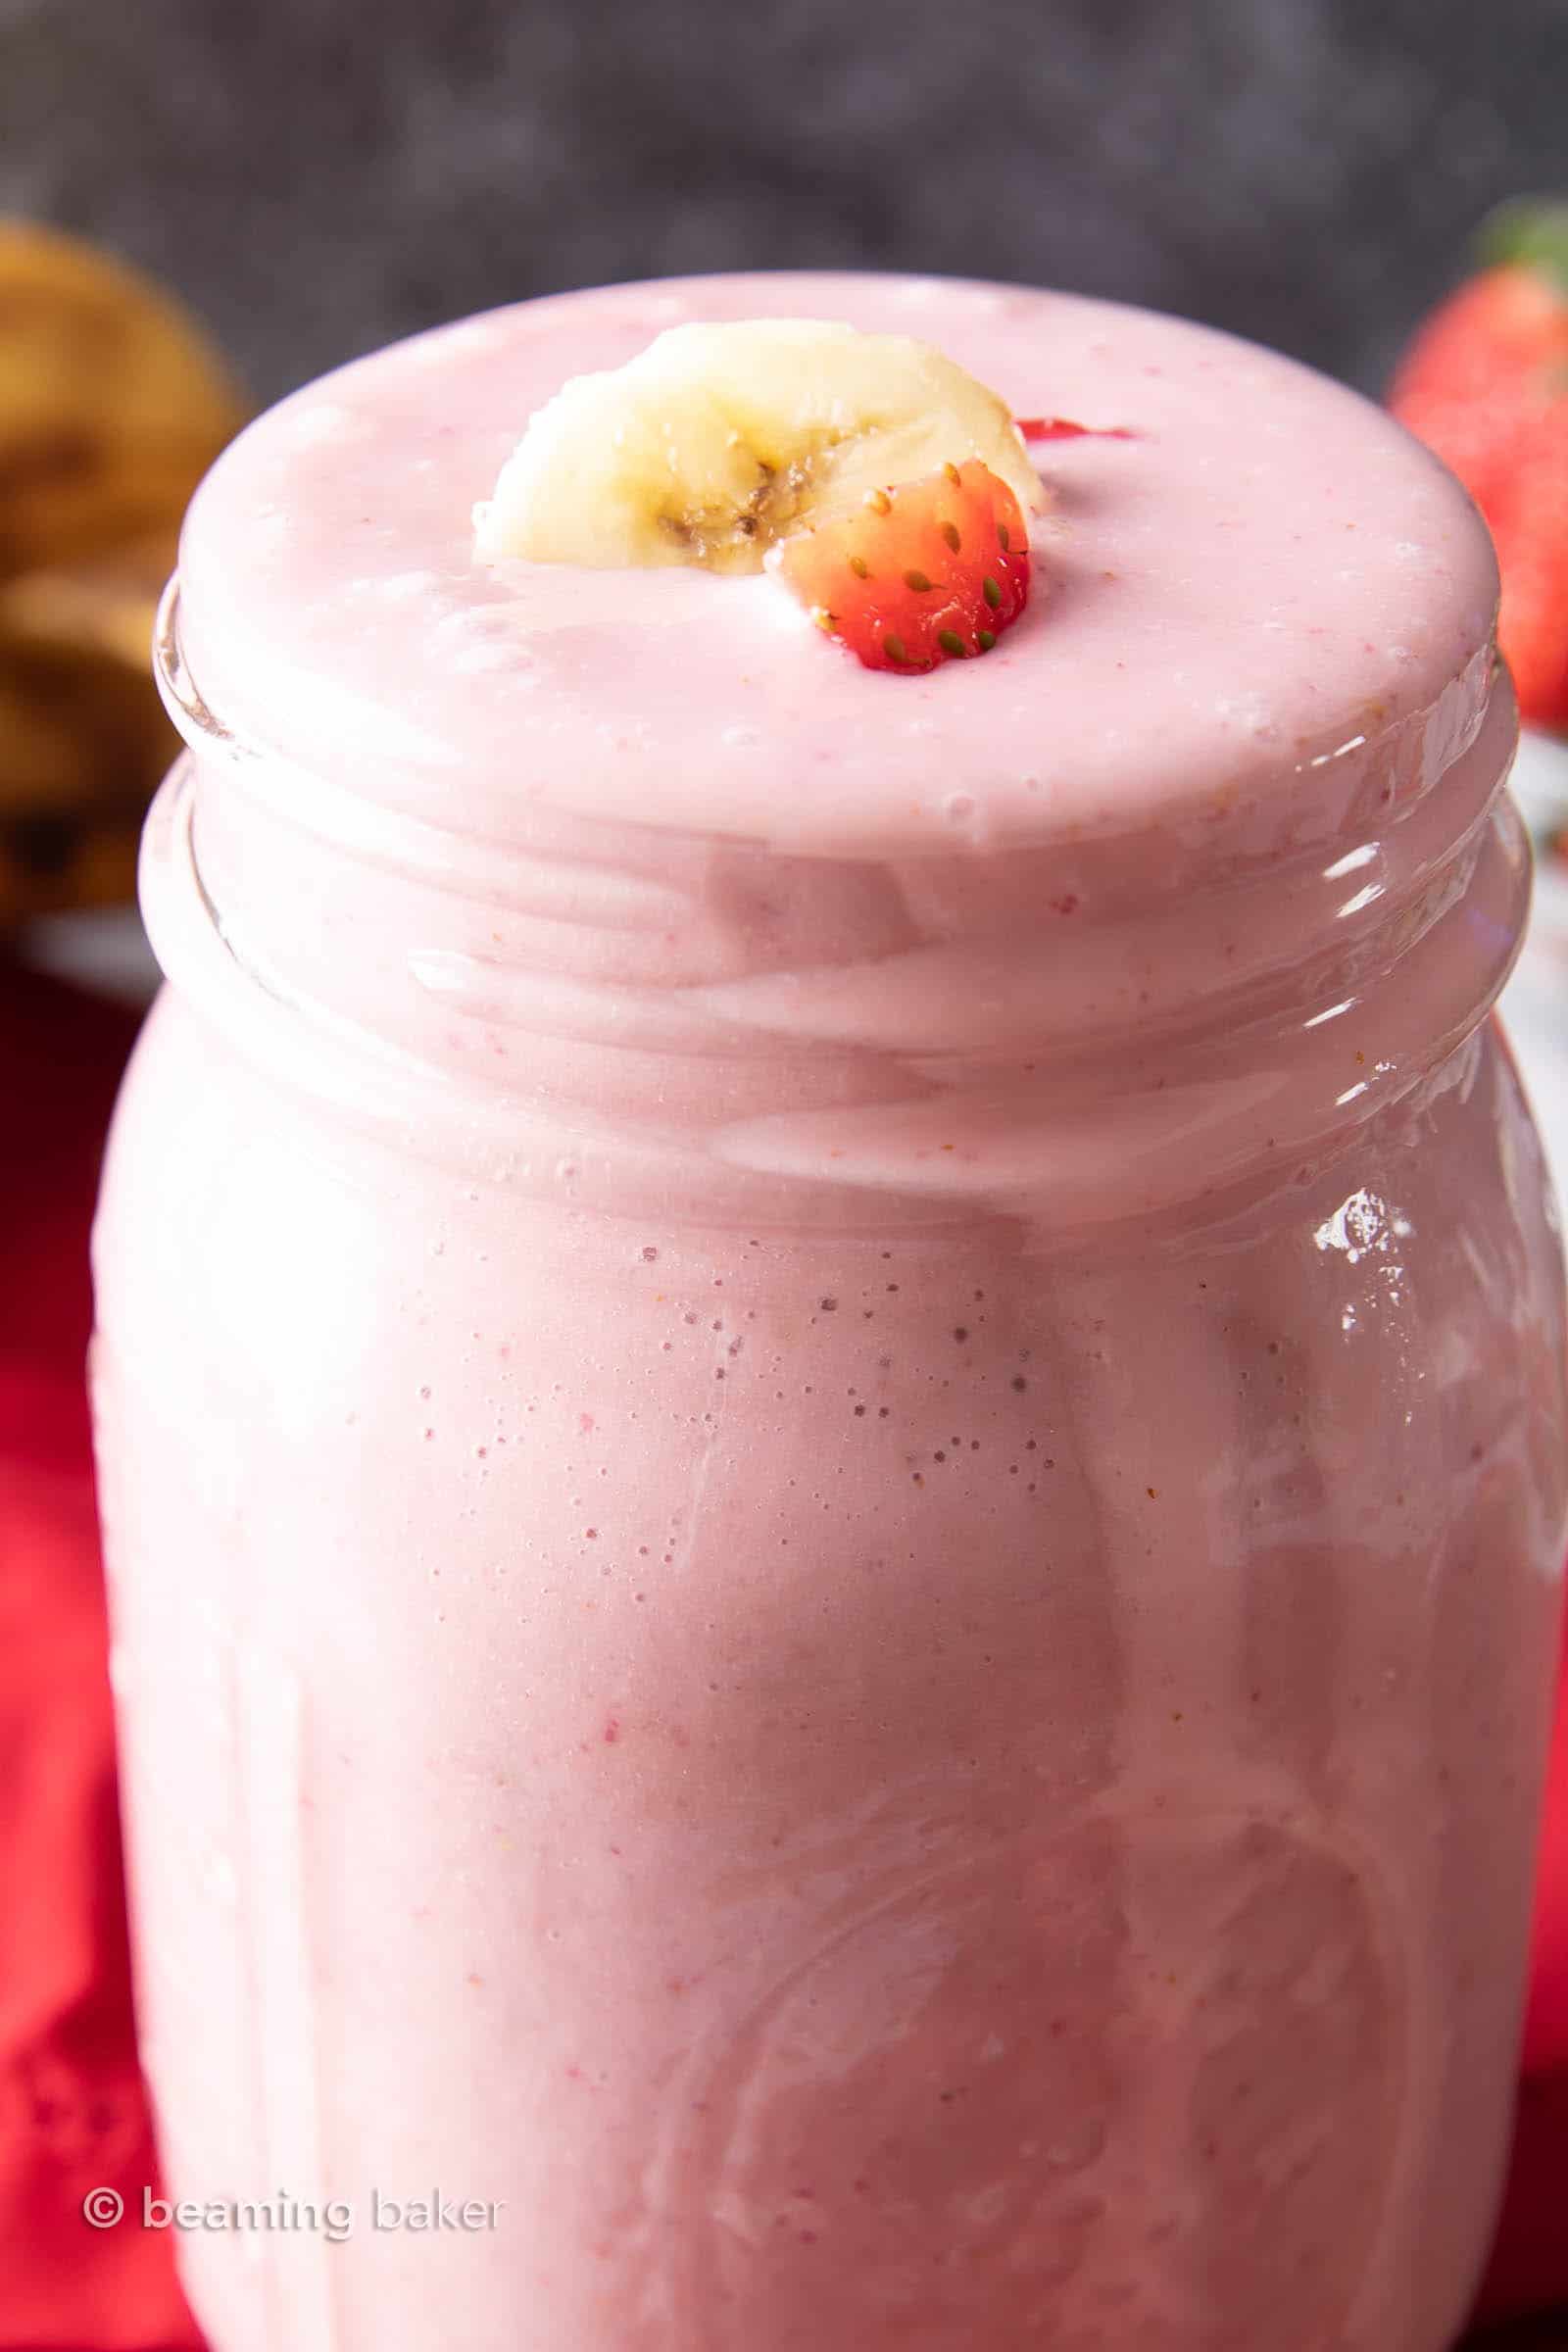 Strawberry Banana Smoothie Recipe: learn how to make a strawberry banana smoothie with 3 ingredients! Smooth, creamy and refreshing! Healthy, Easy to Make, Simple Ingredients. #Strawberry #Smoothie #Banana #Recipe | Recipe at BeamingBaker.com